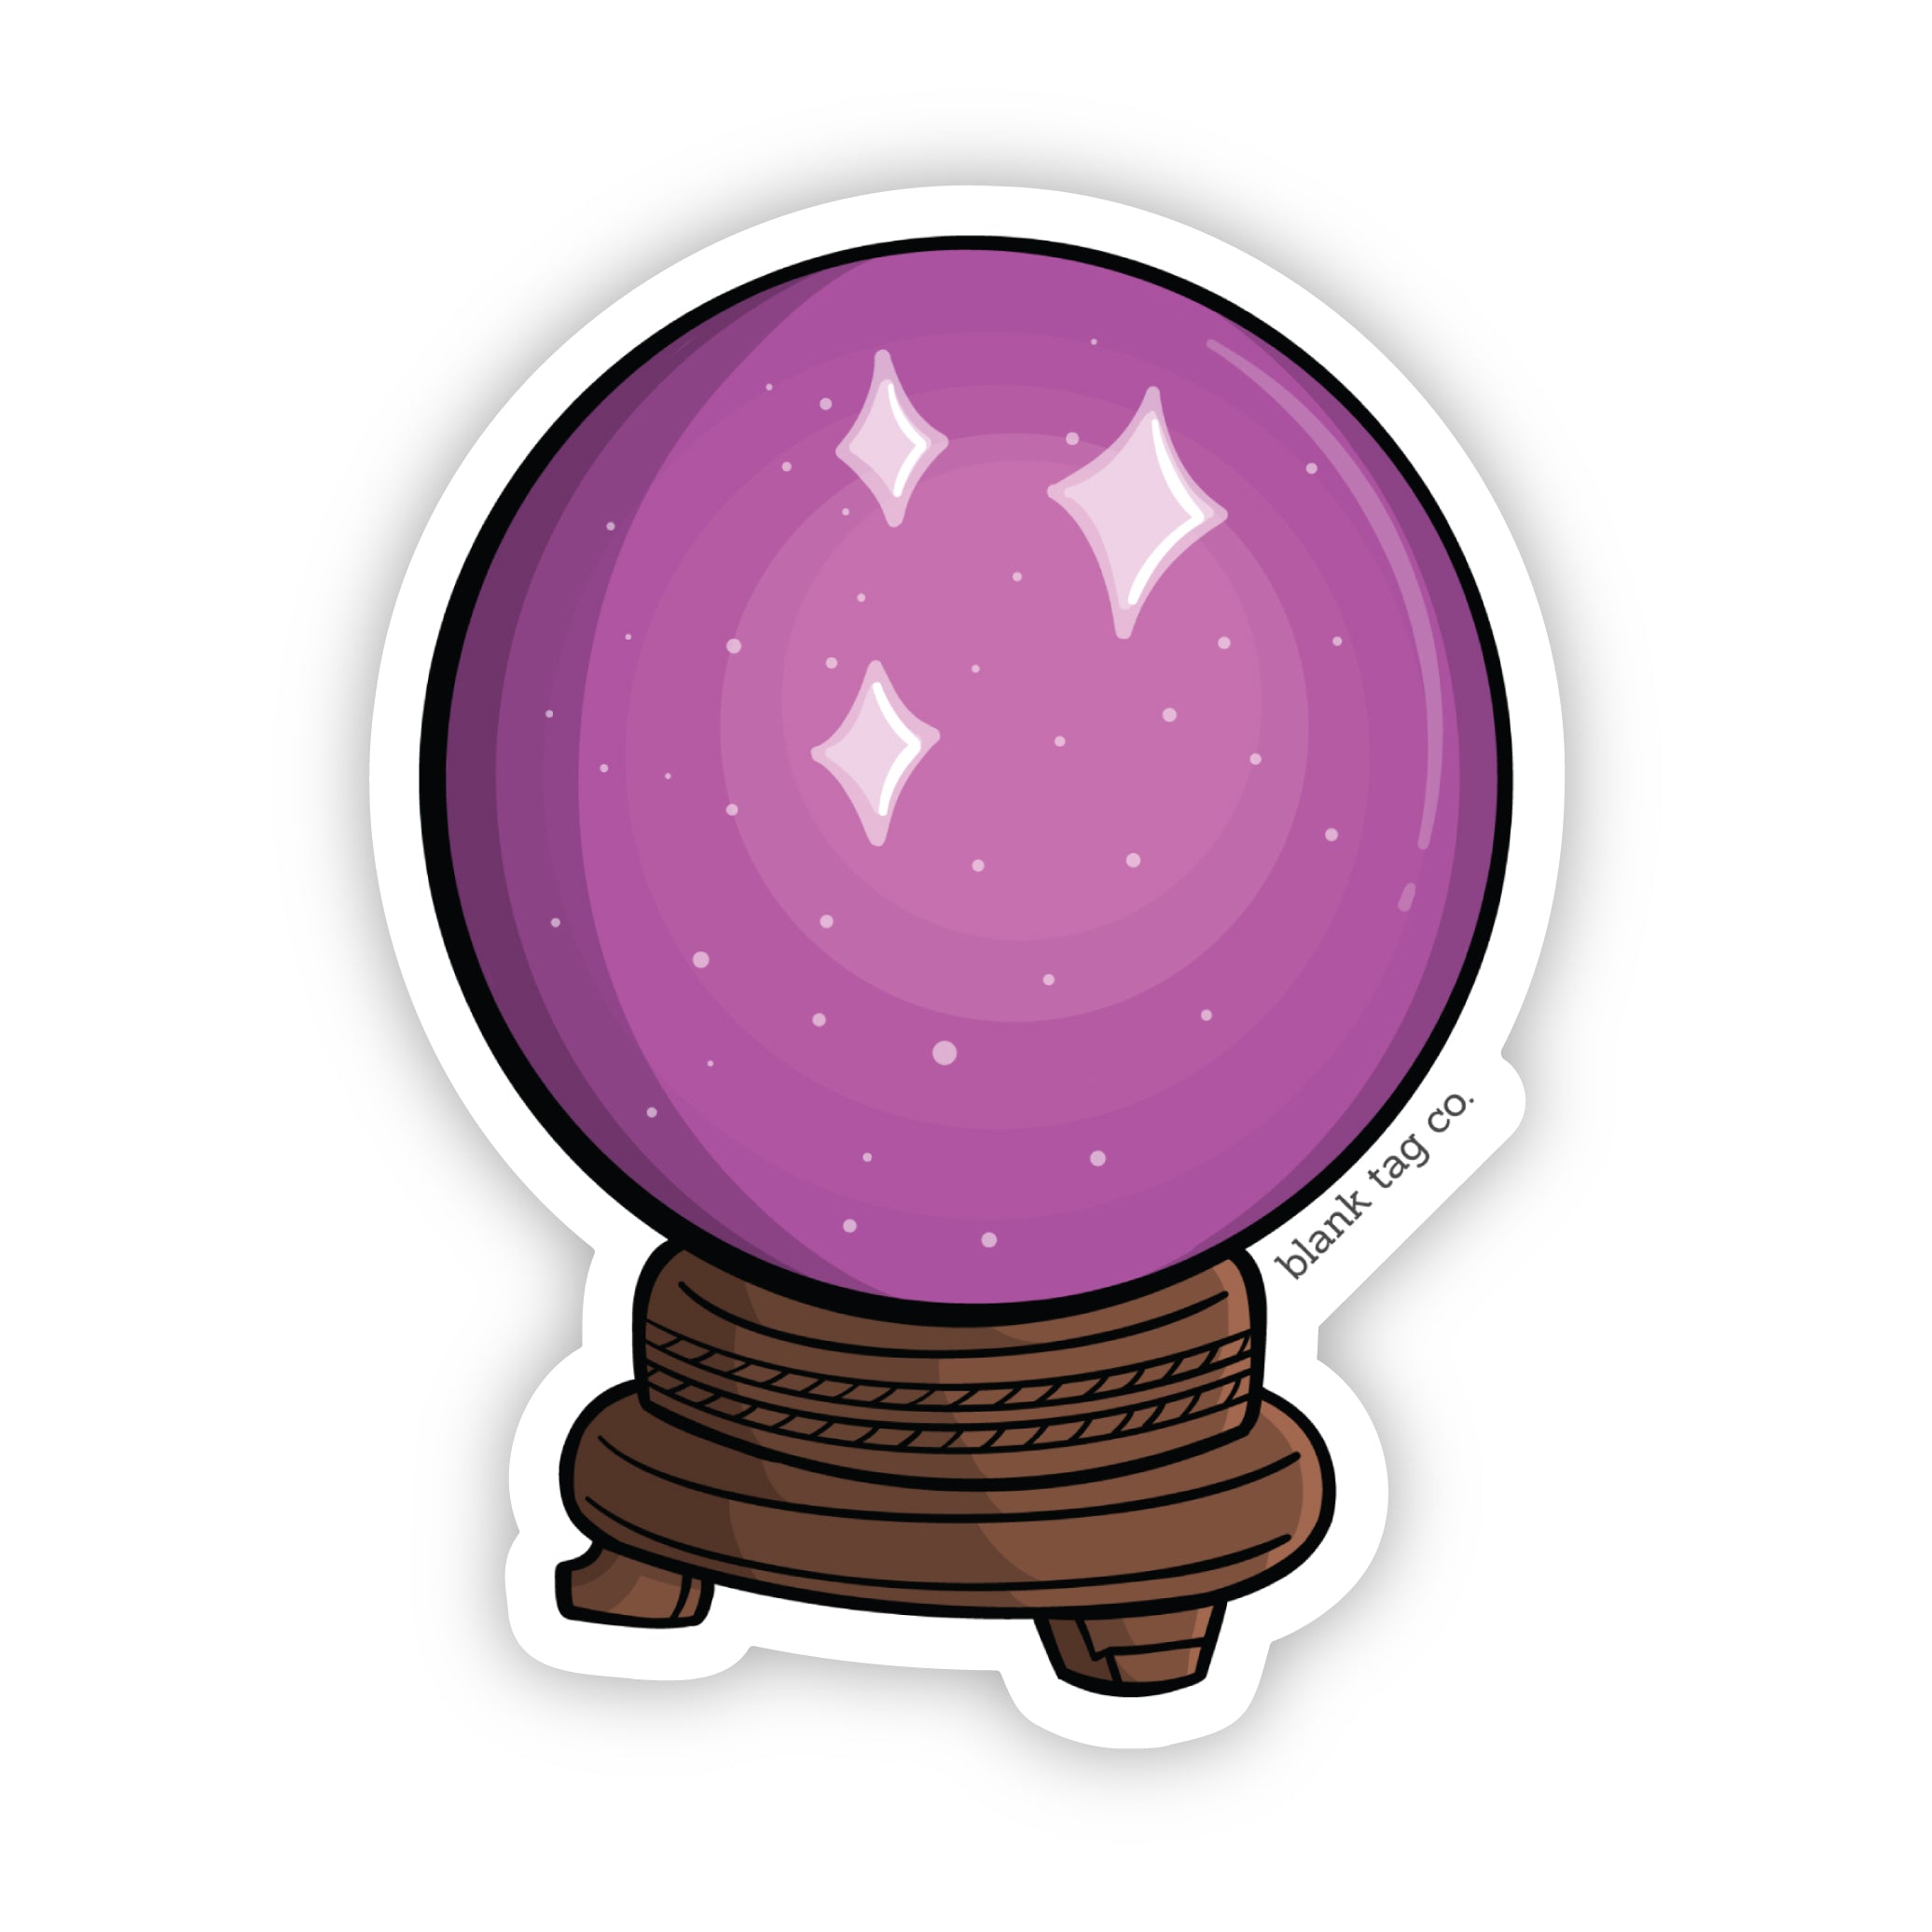 The Crystal Ball Sticker